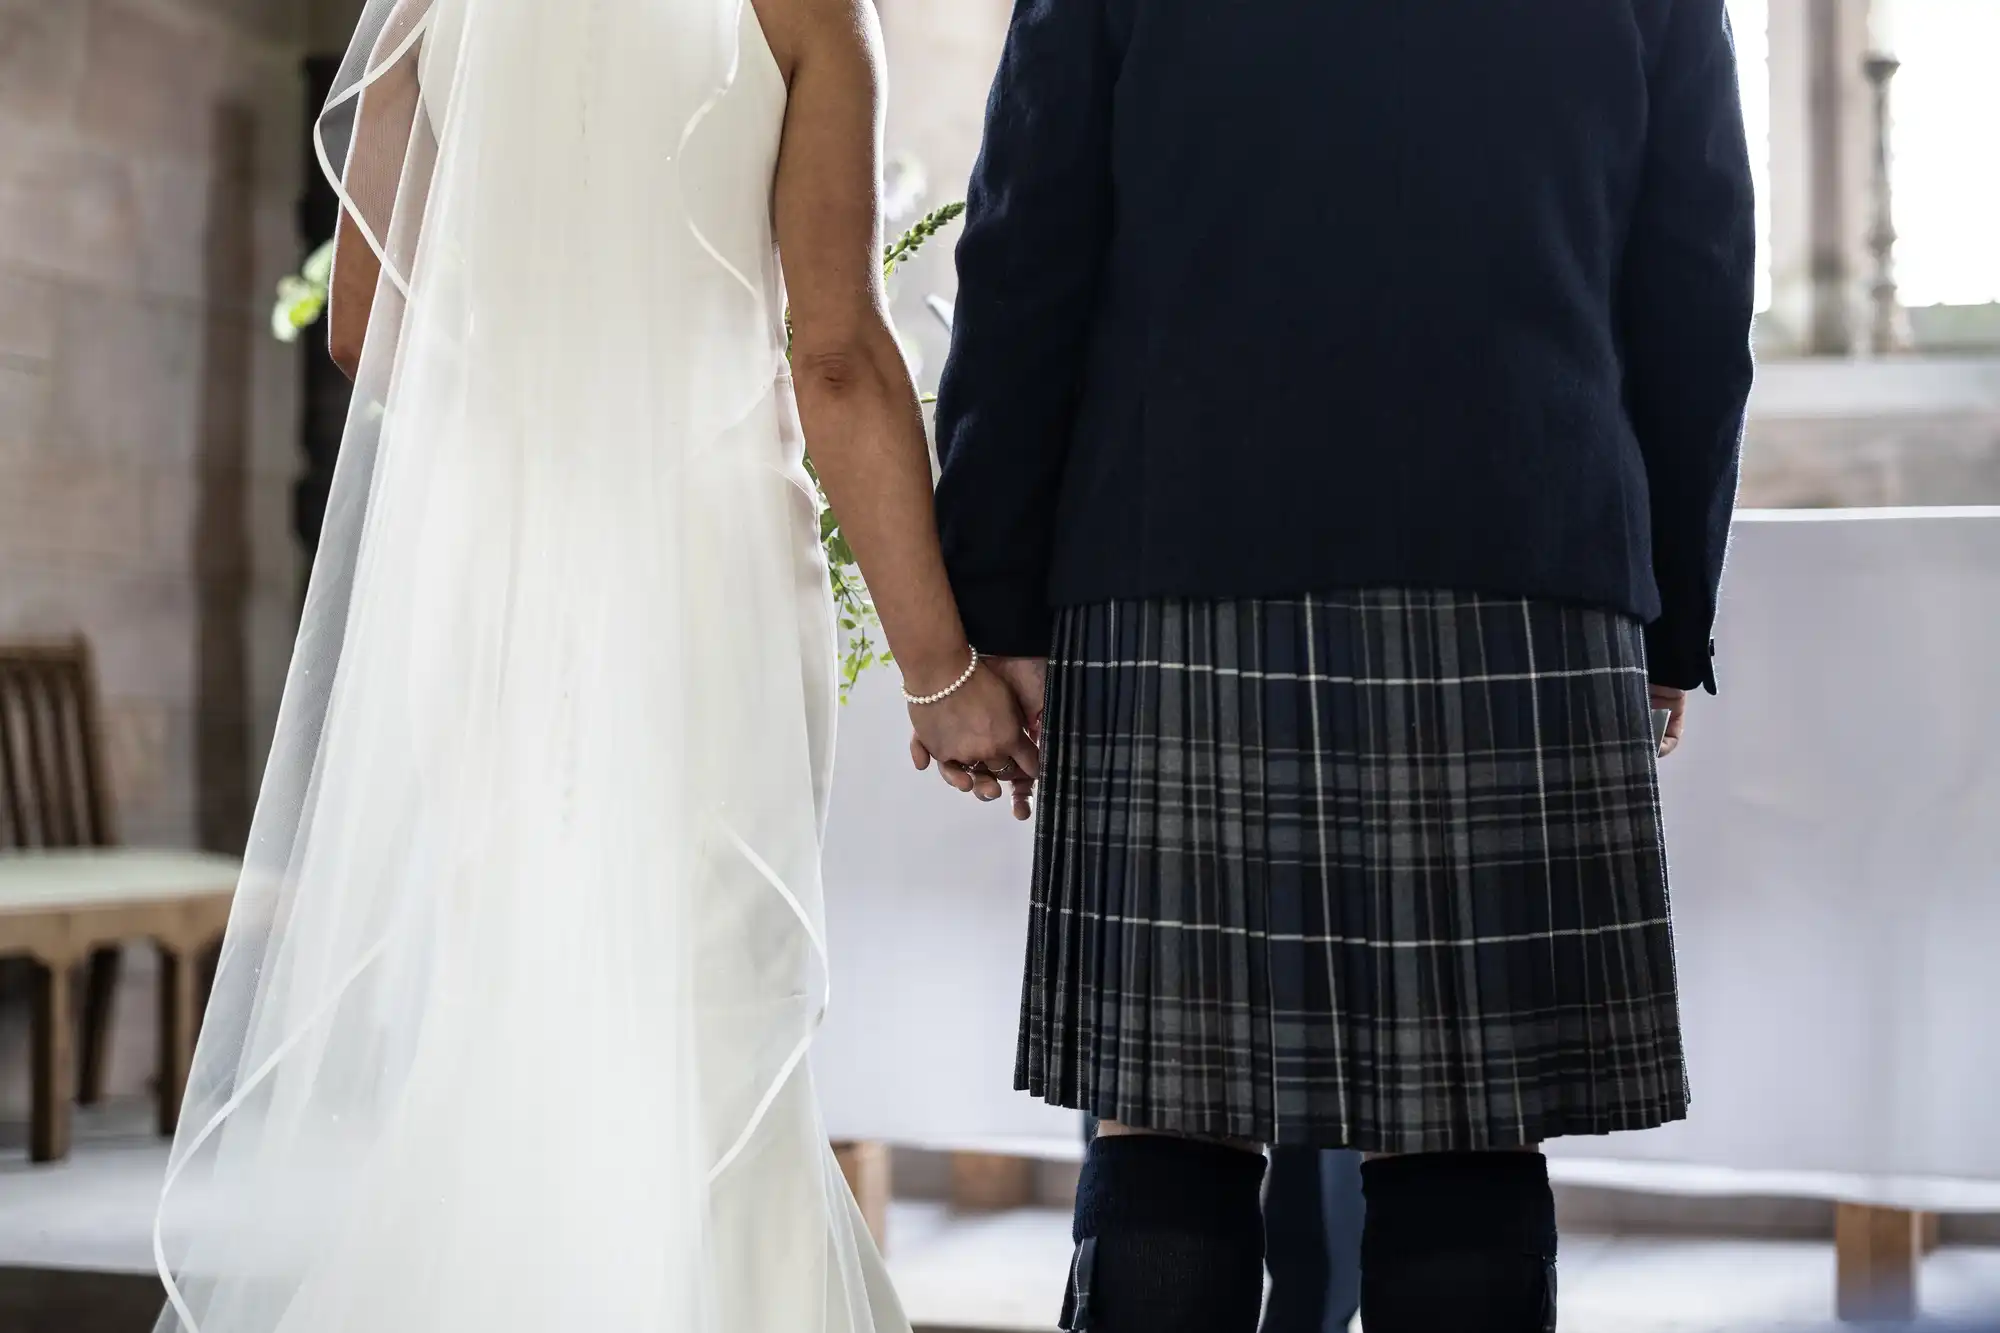 A bride in a white gown and a groom in a kilt hold hands during a wedding ceremony in a church.